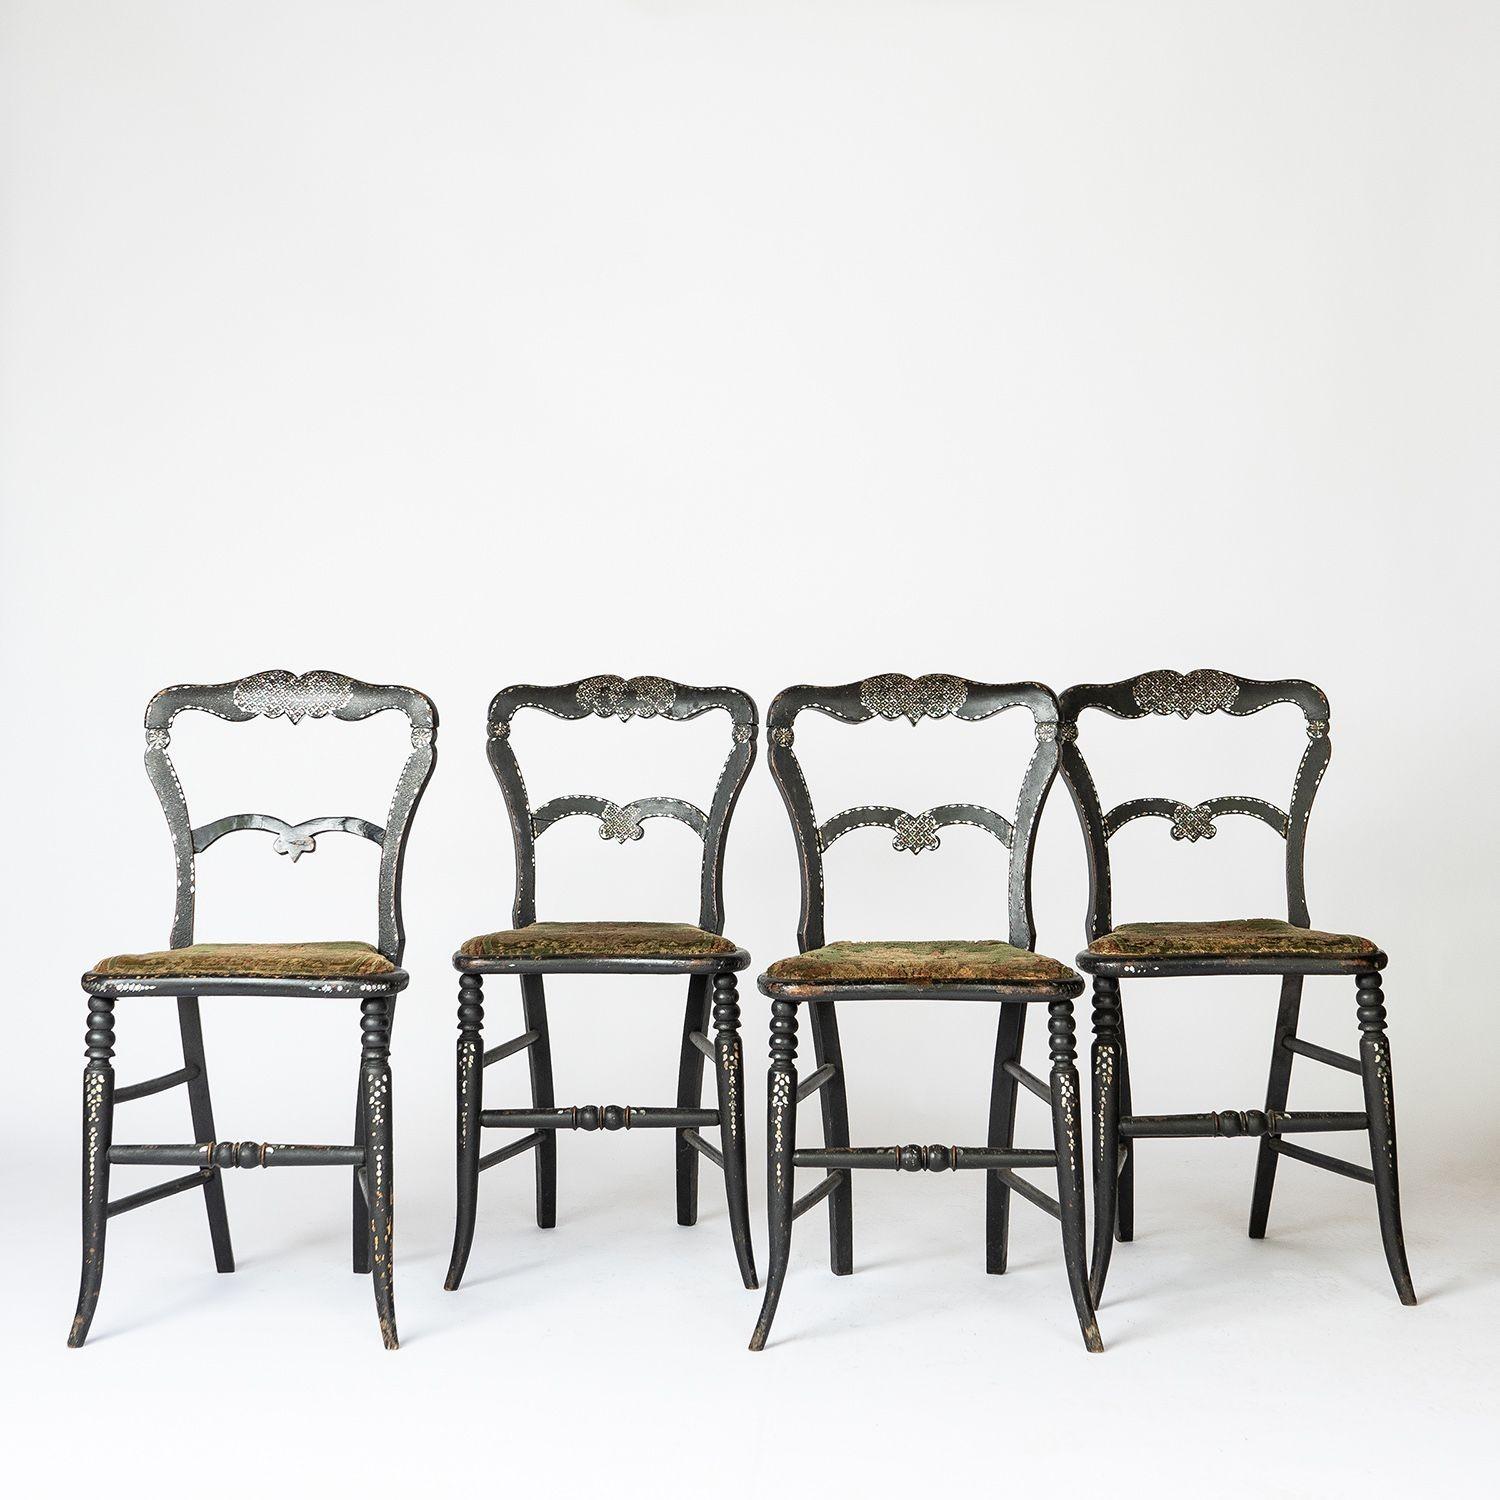 Victorian Set of 4 Antique Ebonised Mother of Pearl Inlaid Chairs With Velvet Upholstery For Sale